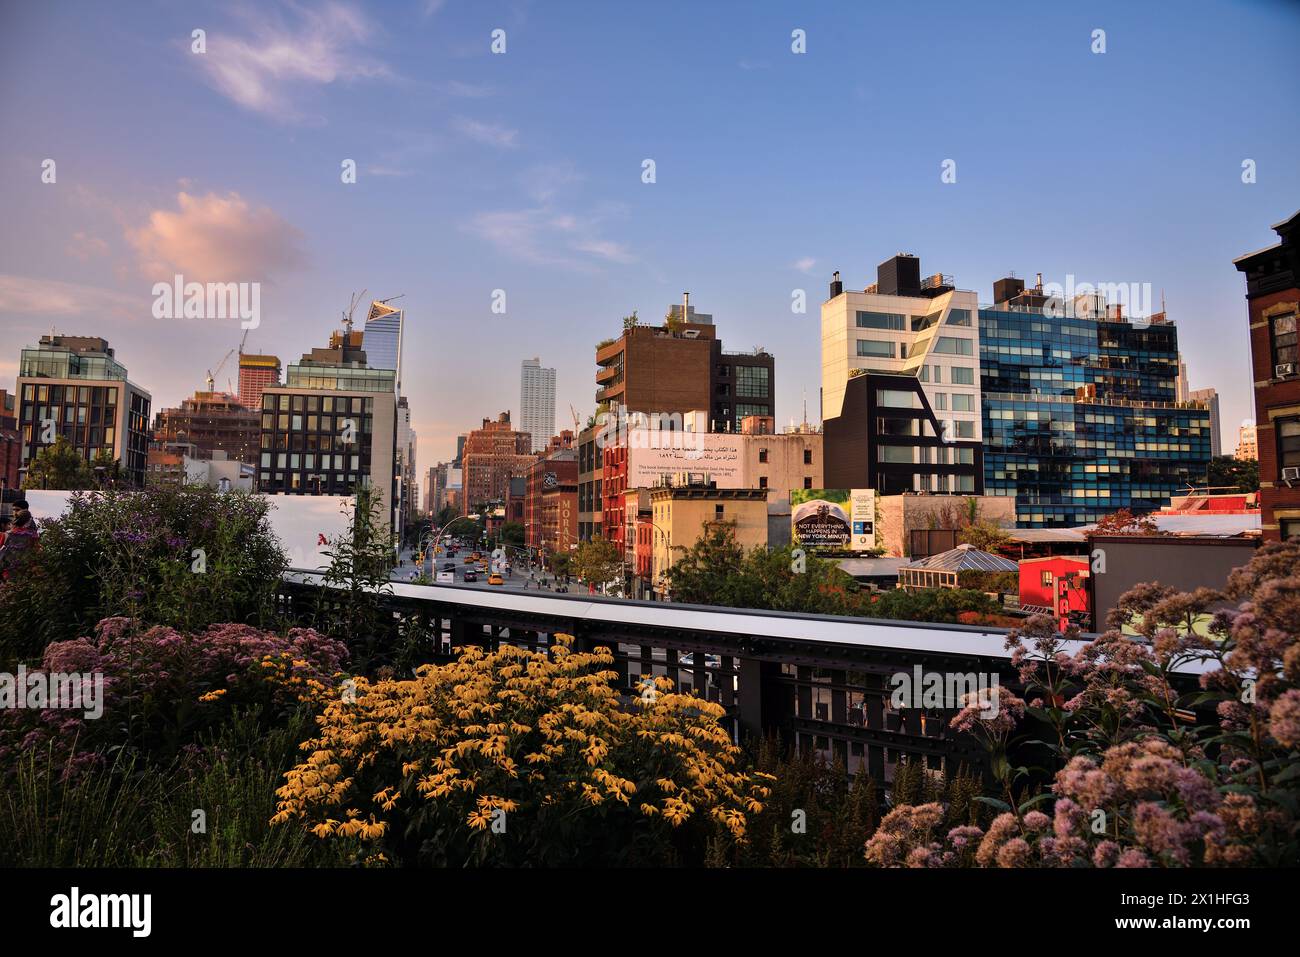 View from the High Line Park to the Buildings of 10th Ave at Dusk - Manhattan, New York City Stock Photo